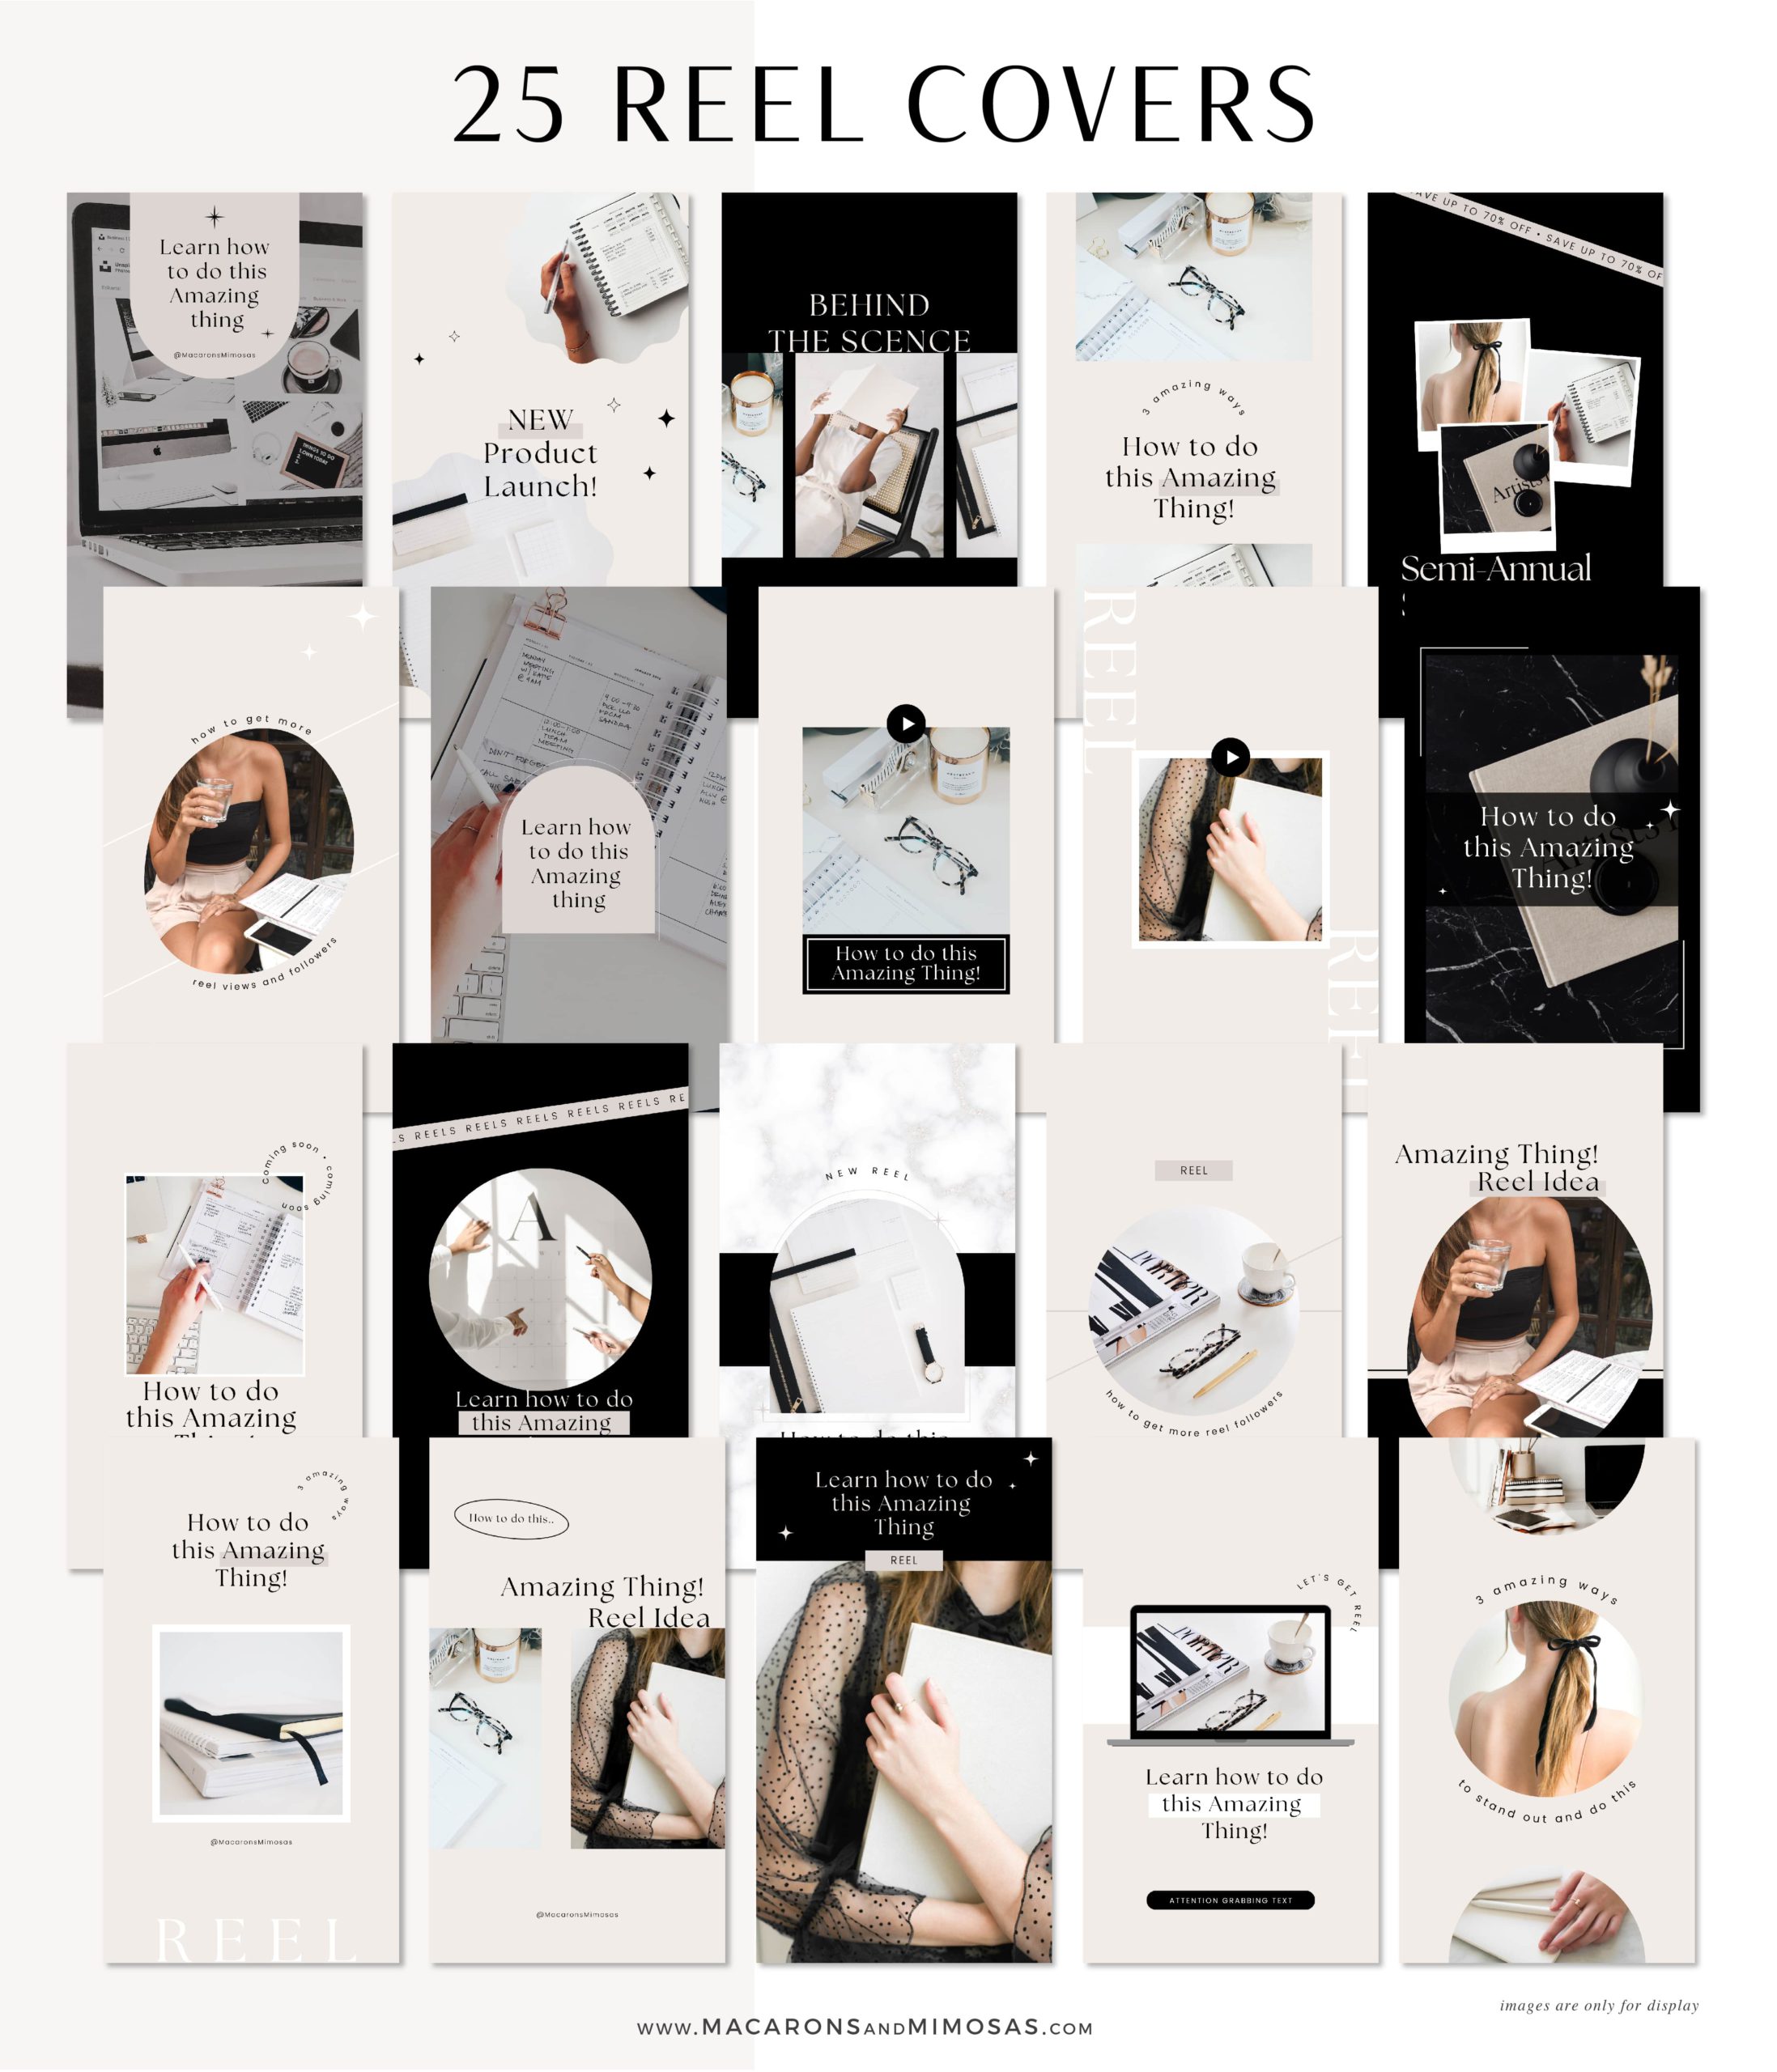 Modern Minimalist Luxe Instagram Reel Templates for Canva, Content Creator Reel Covers Editable in Canva, Instagram Stories, TikTok and Pinterest Bundle